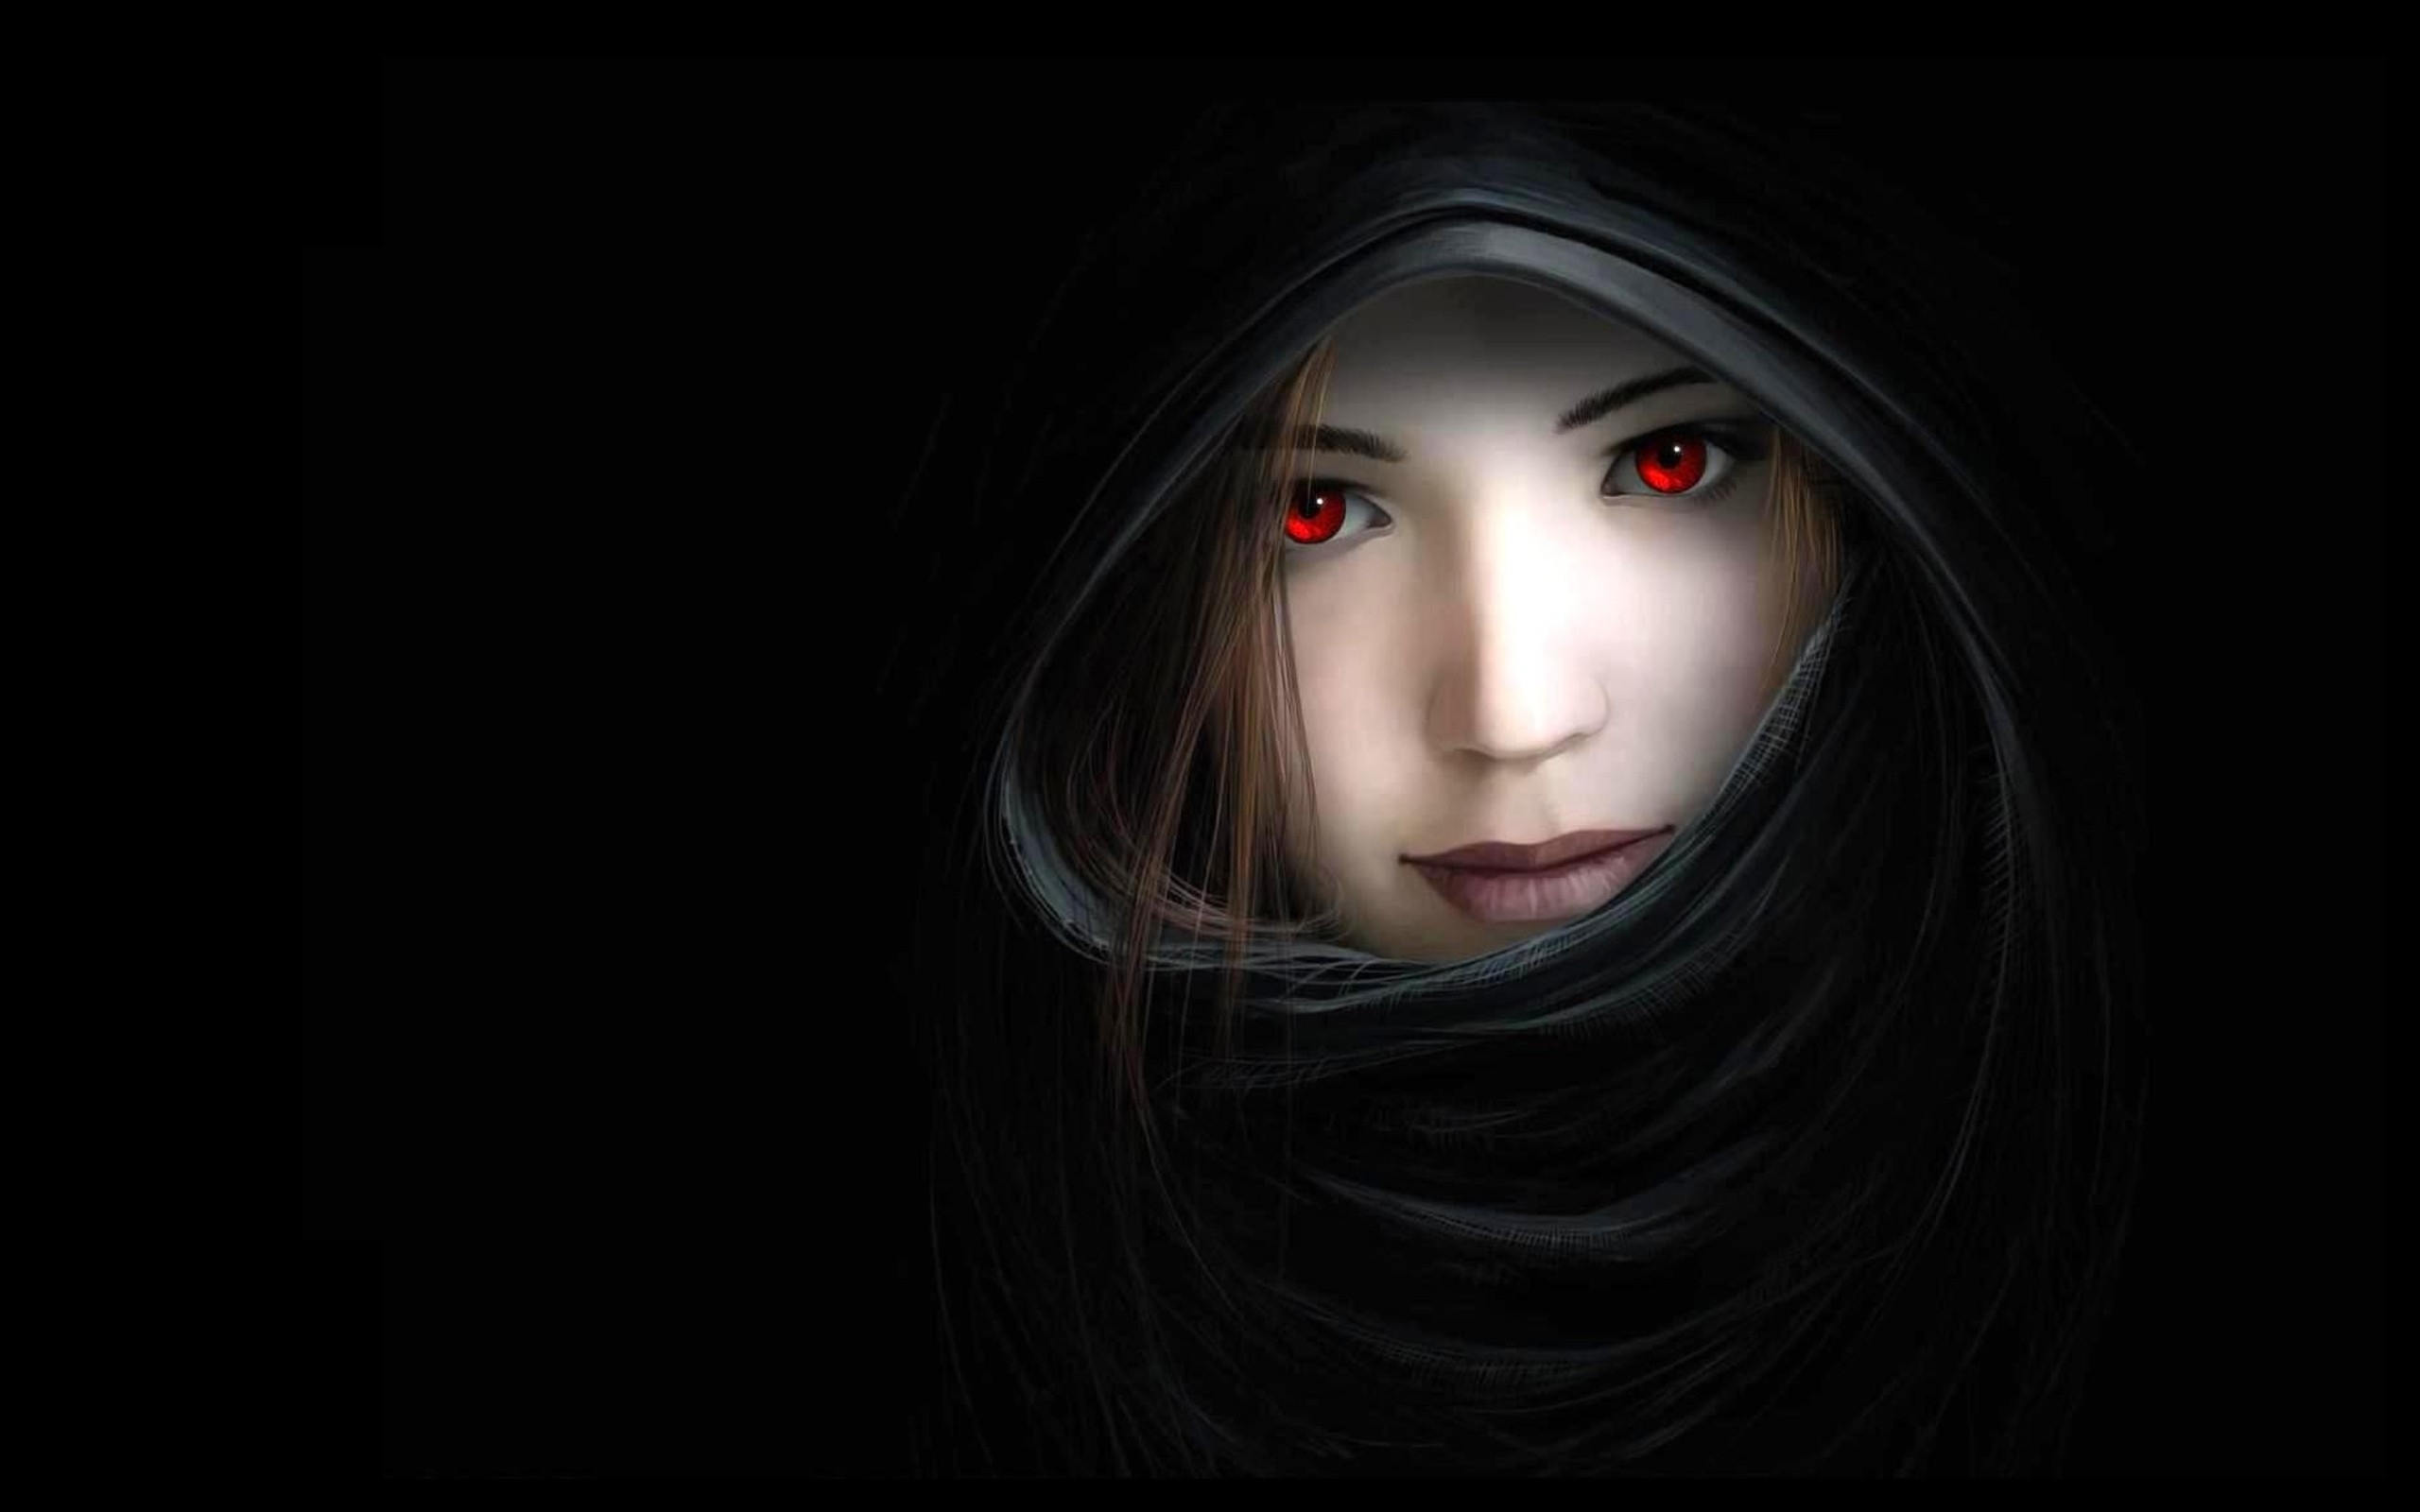 women_dark_mouth_red_eyes_artwork_noses_hooded_witches_black_background_Wallpaper_2560x1600_www.wall321.com.jpg